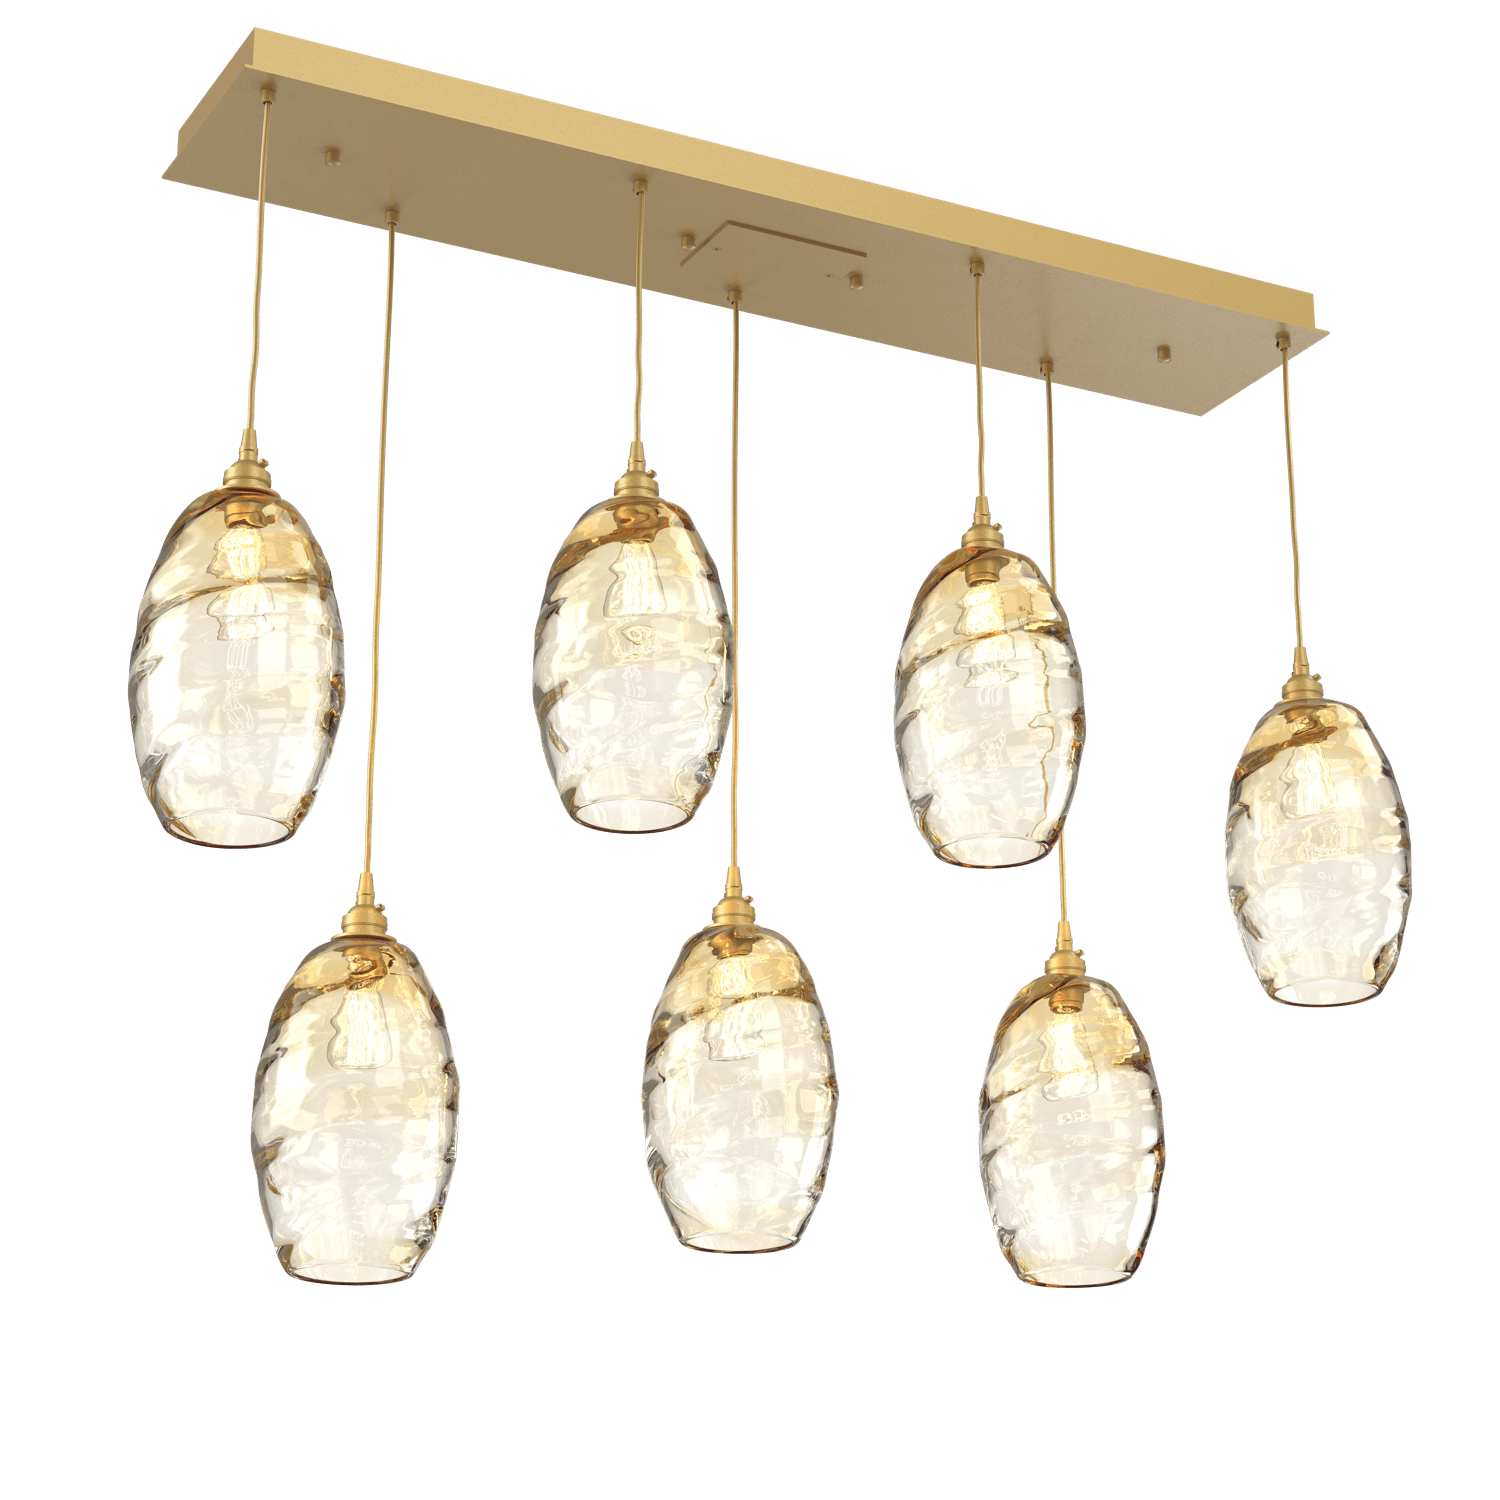 PLB0035-07-GB-OA-Hammerton-Studio-Optic-Blown-Glass-Elisse-7-light-linear-pendant-chandelier-with-gilded-brass-finish-and-optic-amber-blown-glass-shades-and-incandescent-lamping